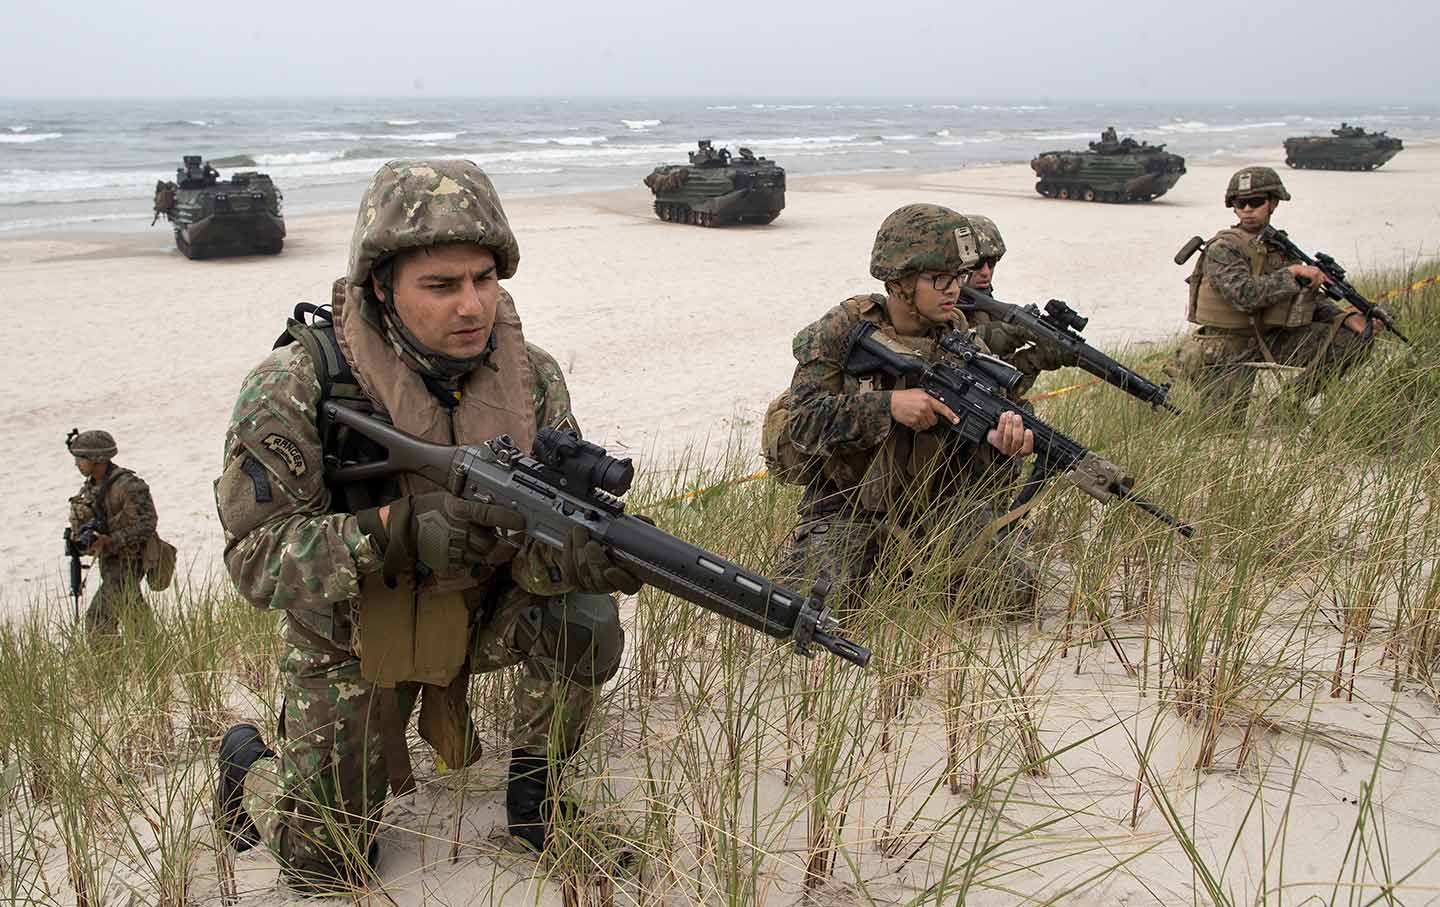 Marines at a NATO Exercise in Lithuania